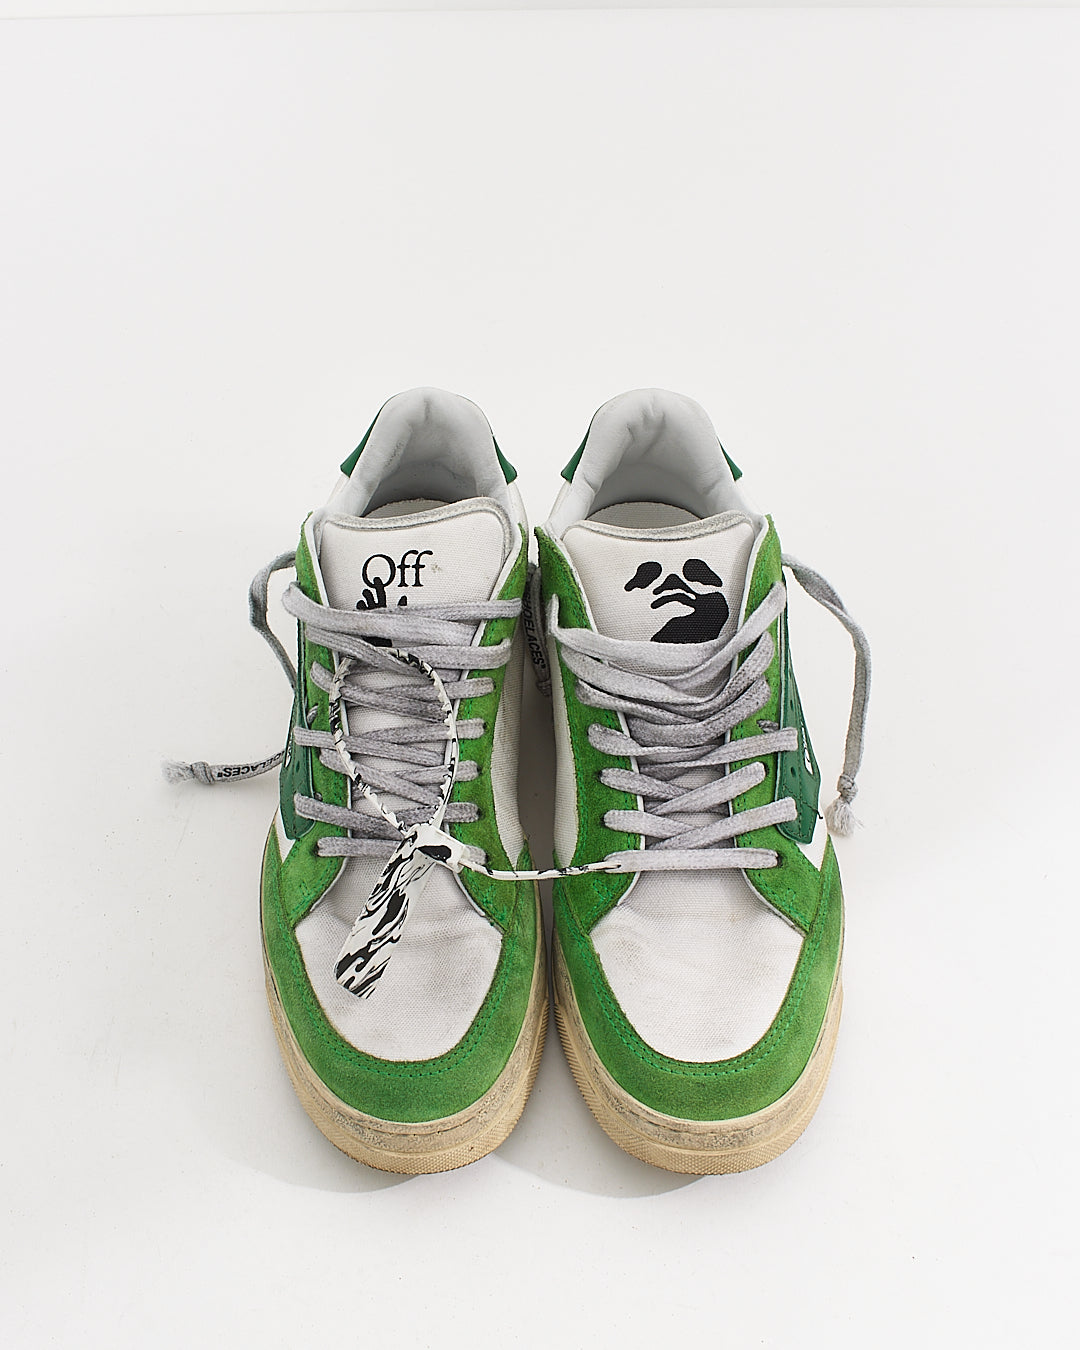 Off-White Men's Green/White Distressed 5.0 Sneakers - 42